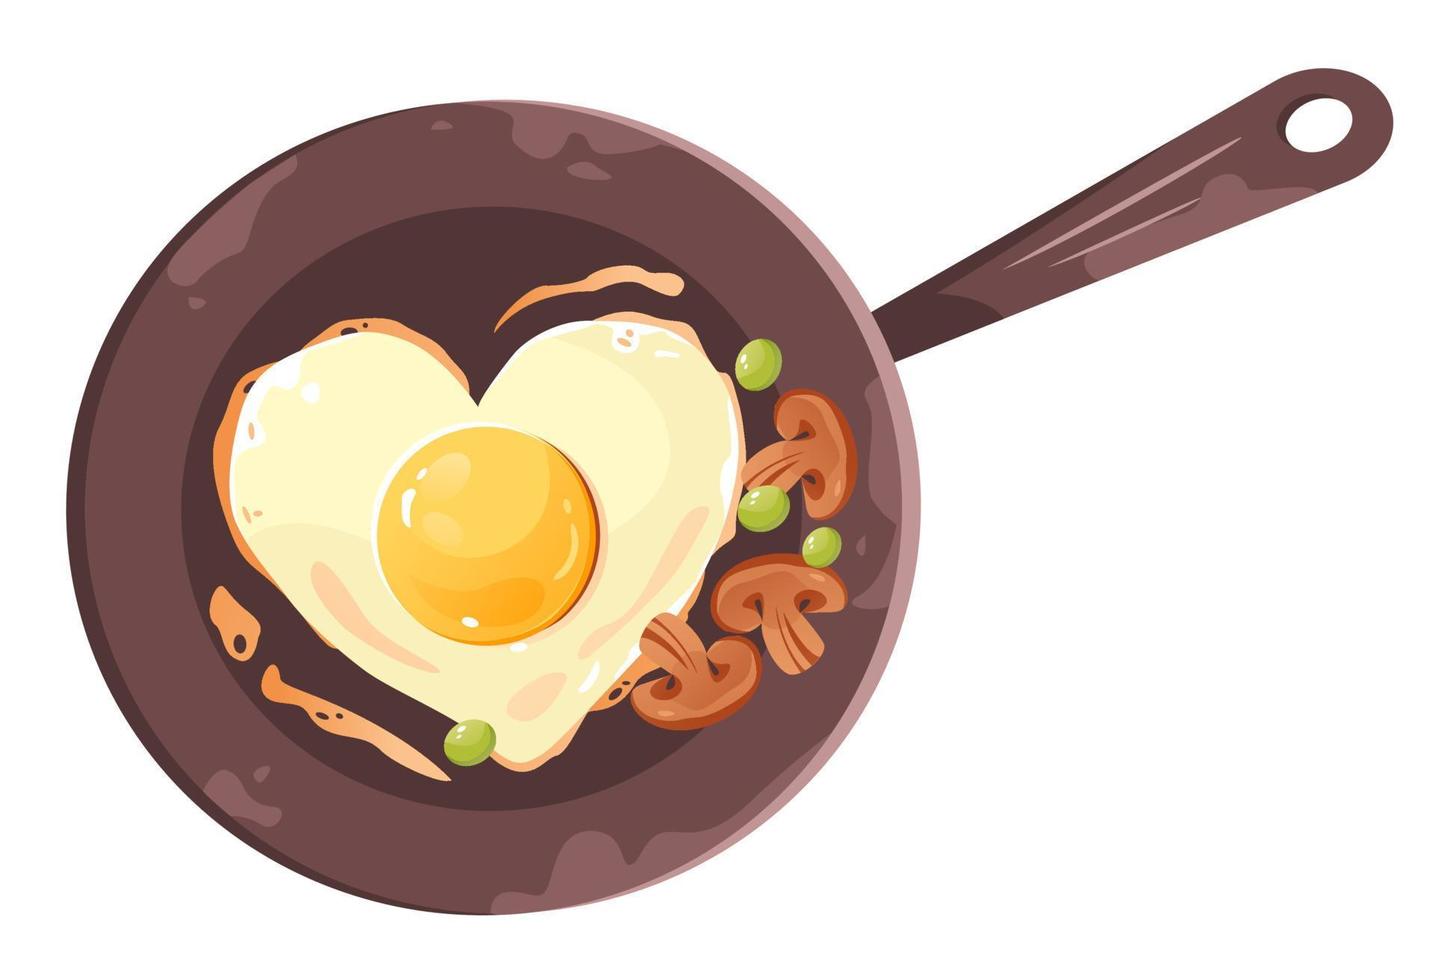 Frying pan with fried eggs in the shape of a heart. Traditional breakfast. Healthy homemade food. Cartoon vector illustration isolated on a white background